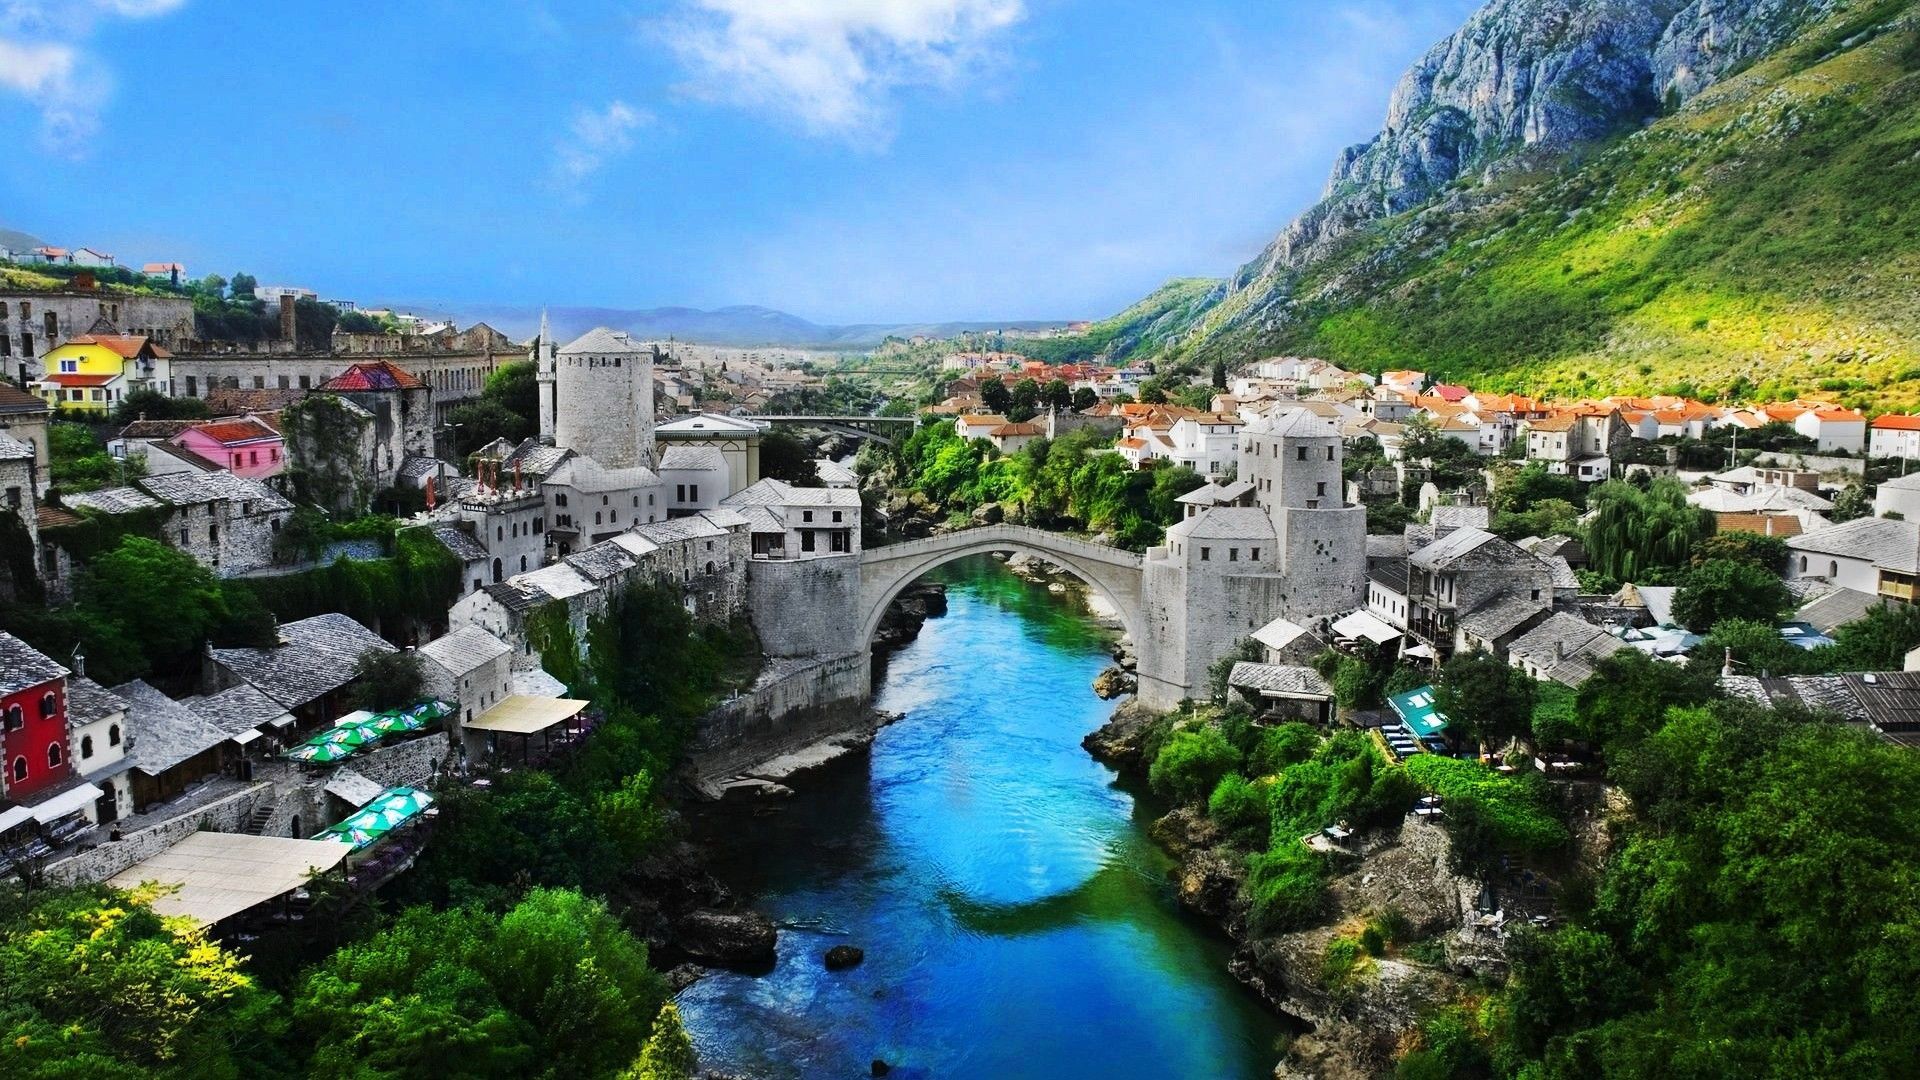 With PayPorter, you can make fast, easy and safe money transfers to  Bosnia and Herzegovina at the most affordable prices!